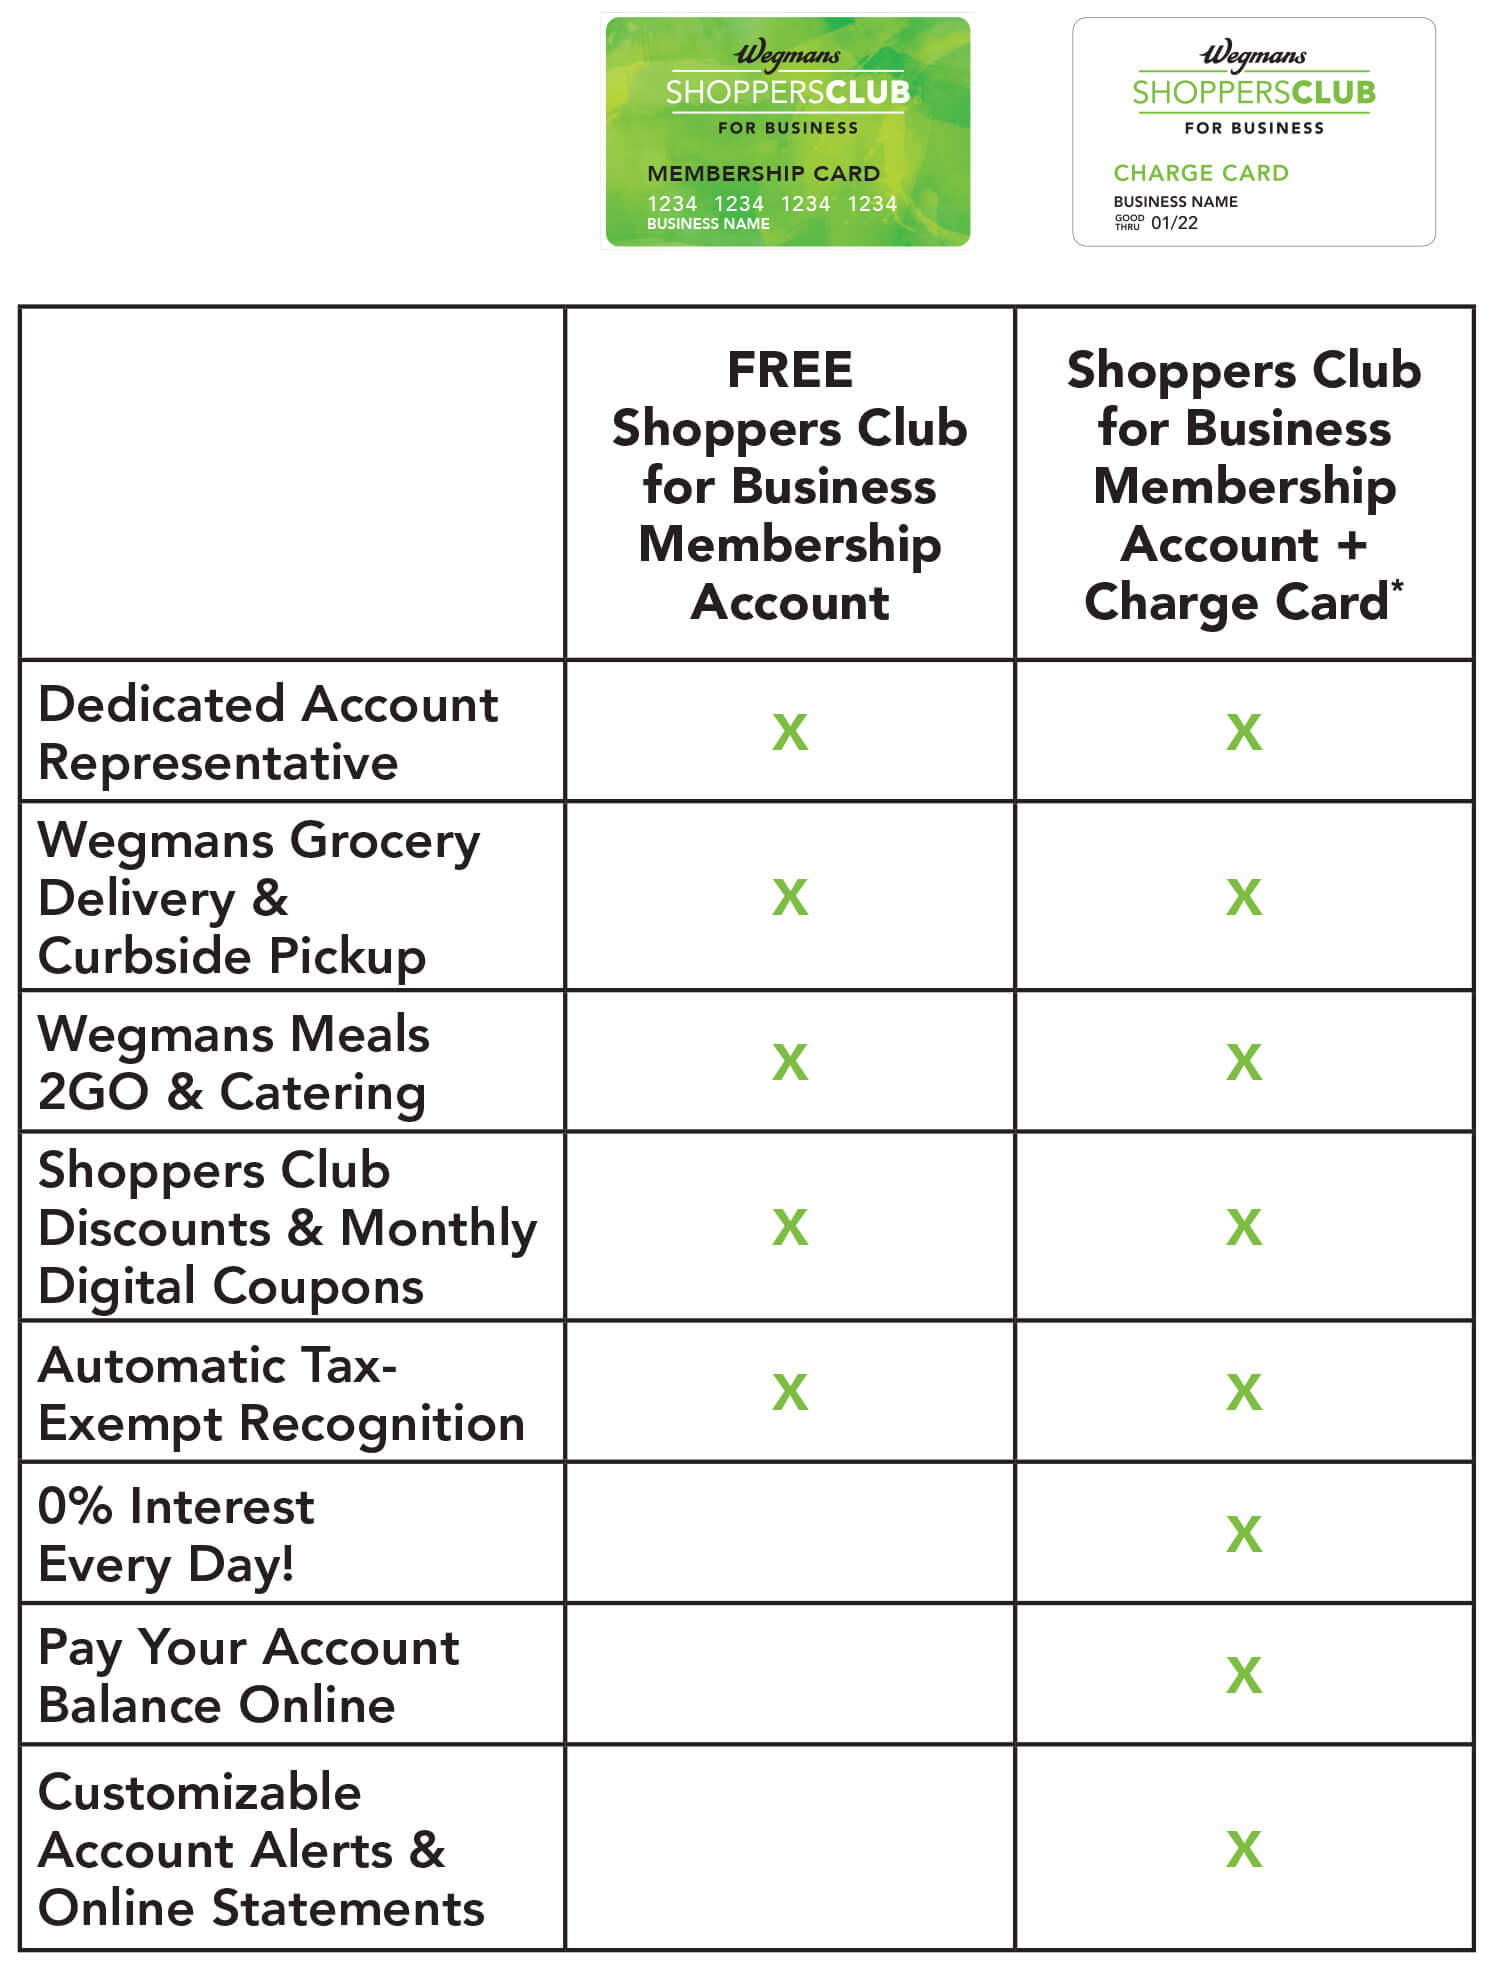 Shoppers Club for Business Membership chart